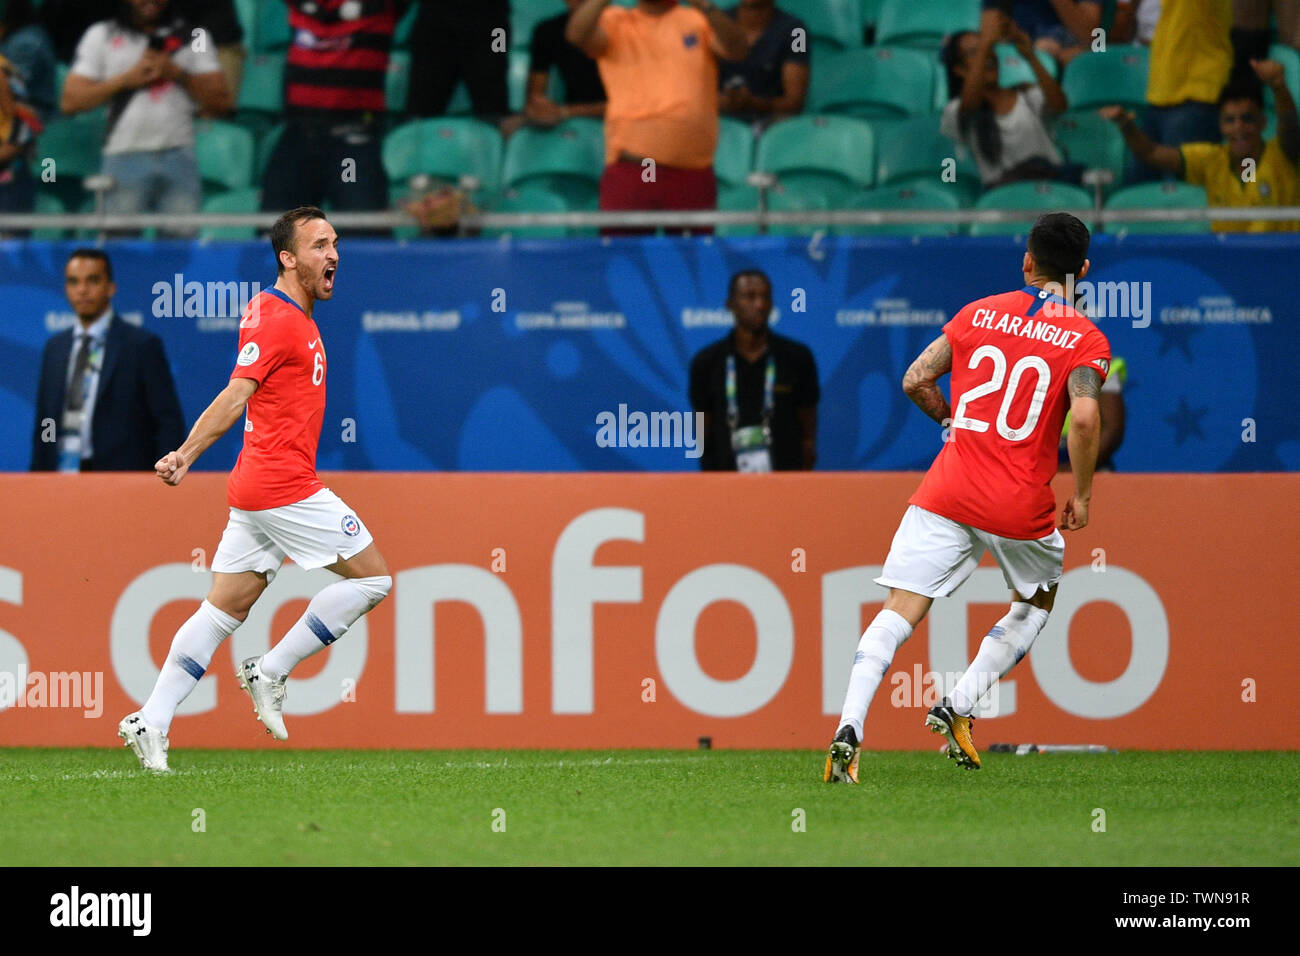 Salvador, Brazil. 21st June, 2019. Chile's Jose Pedro Fuenzalida(L) celebrates after scoring during the Group C match between Chile and Ecuador at the Copa America 2019, held in Salvador, Brazil, June 21, 2019. Credit: Xin Yuewei/Xinhua/Alamy Live News Stock Photo